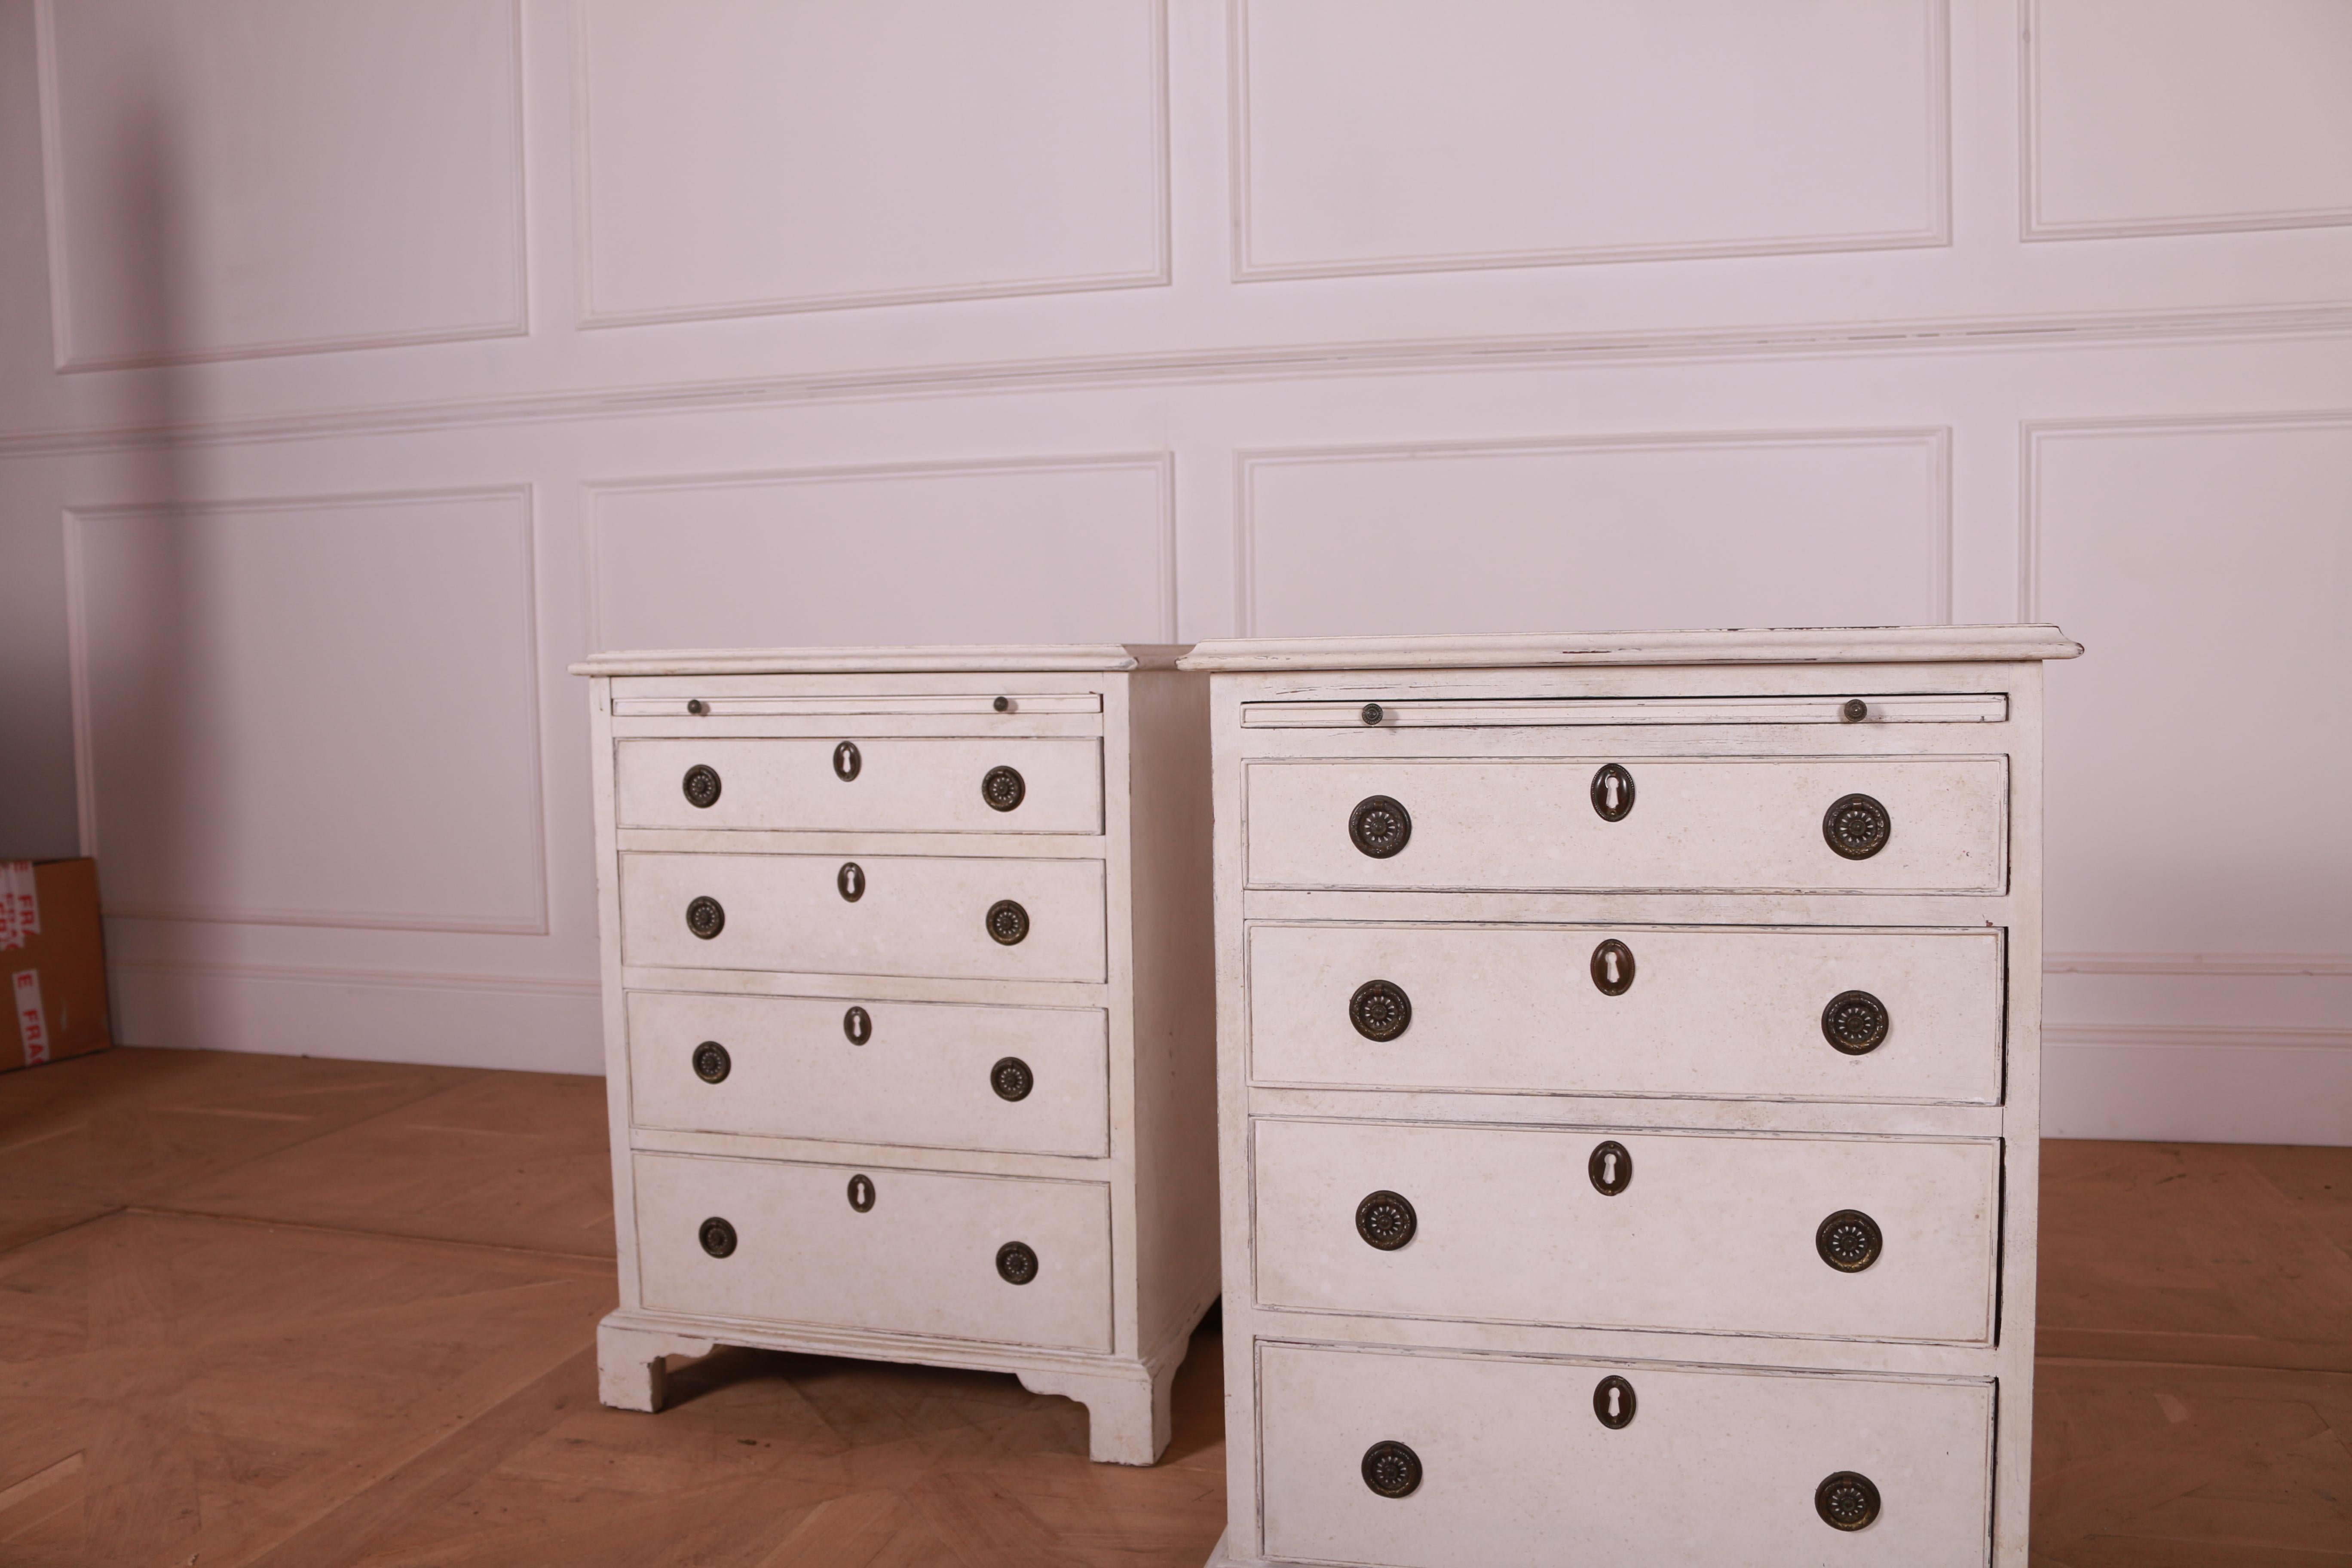 A pair of English pine commodes from circa 1890 with antique off white painted finish, pull-out drawer followed by four graduating ones, and carved bracket feet. Envision these quintessentially English pine commodes from circa 1890 as a charming